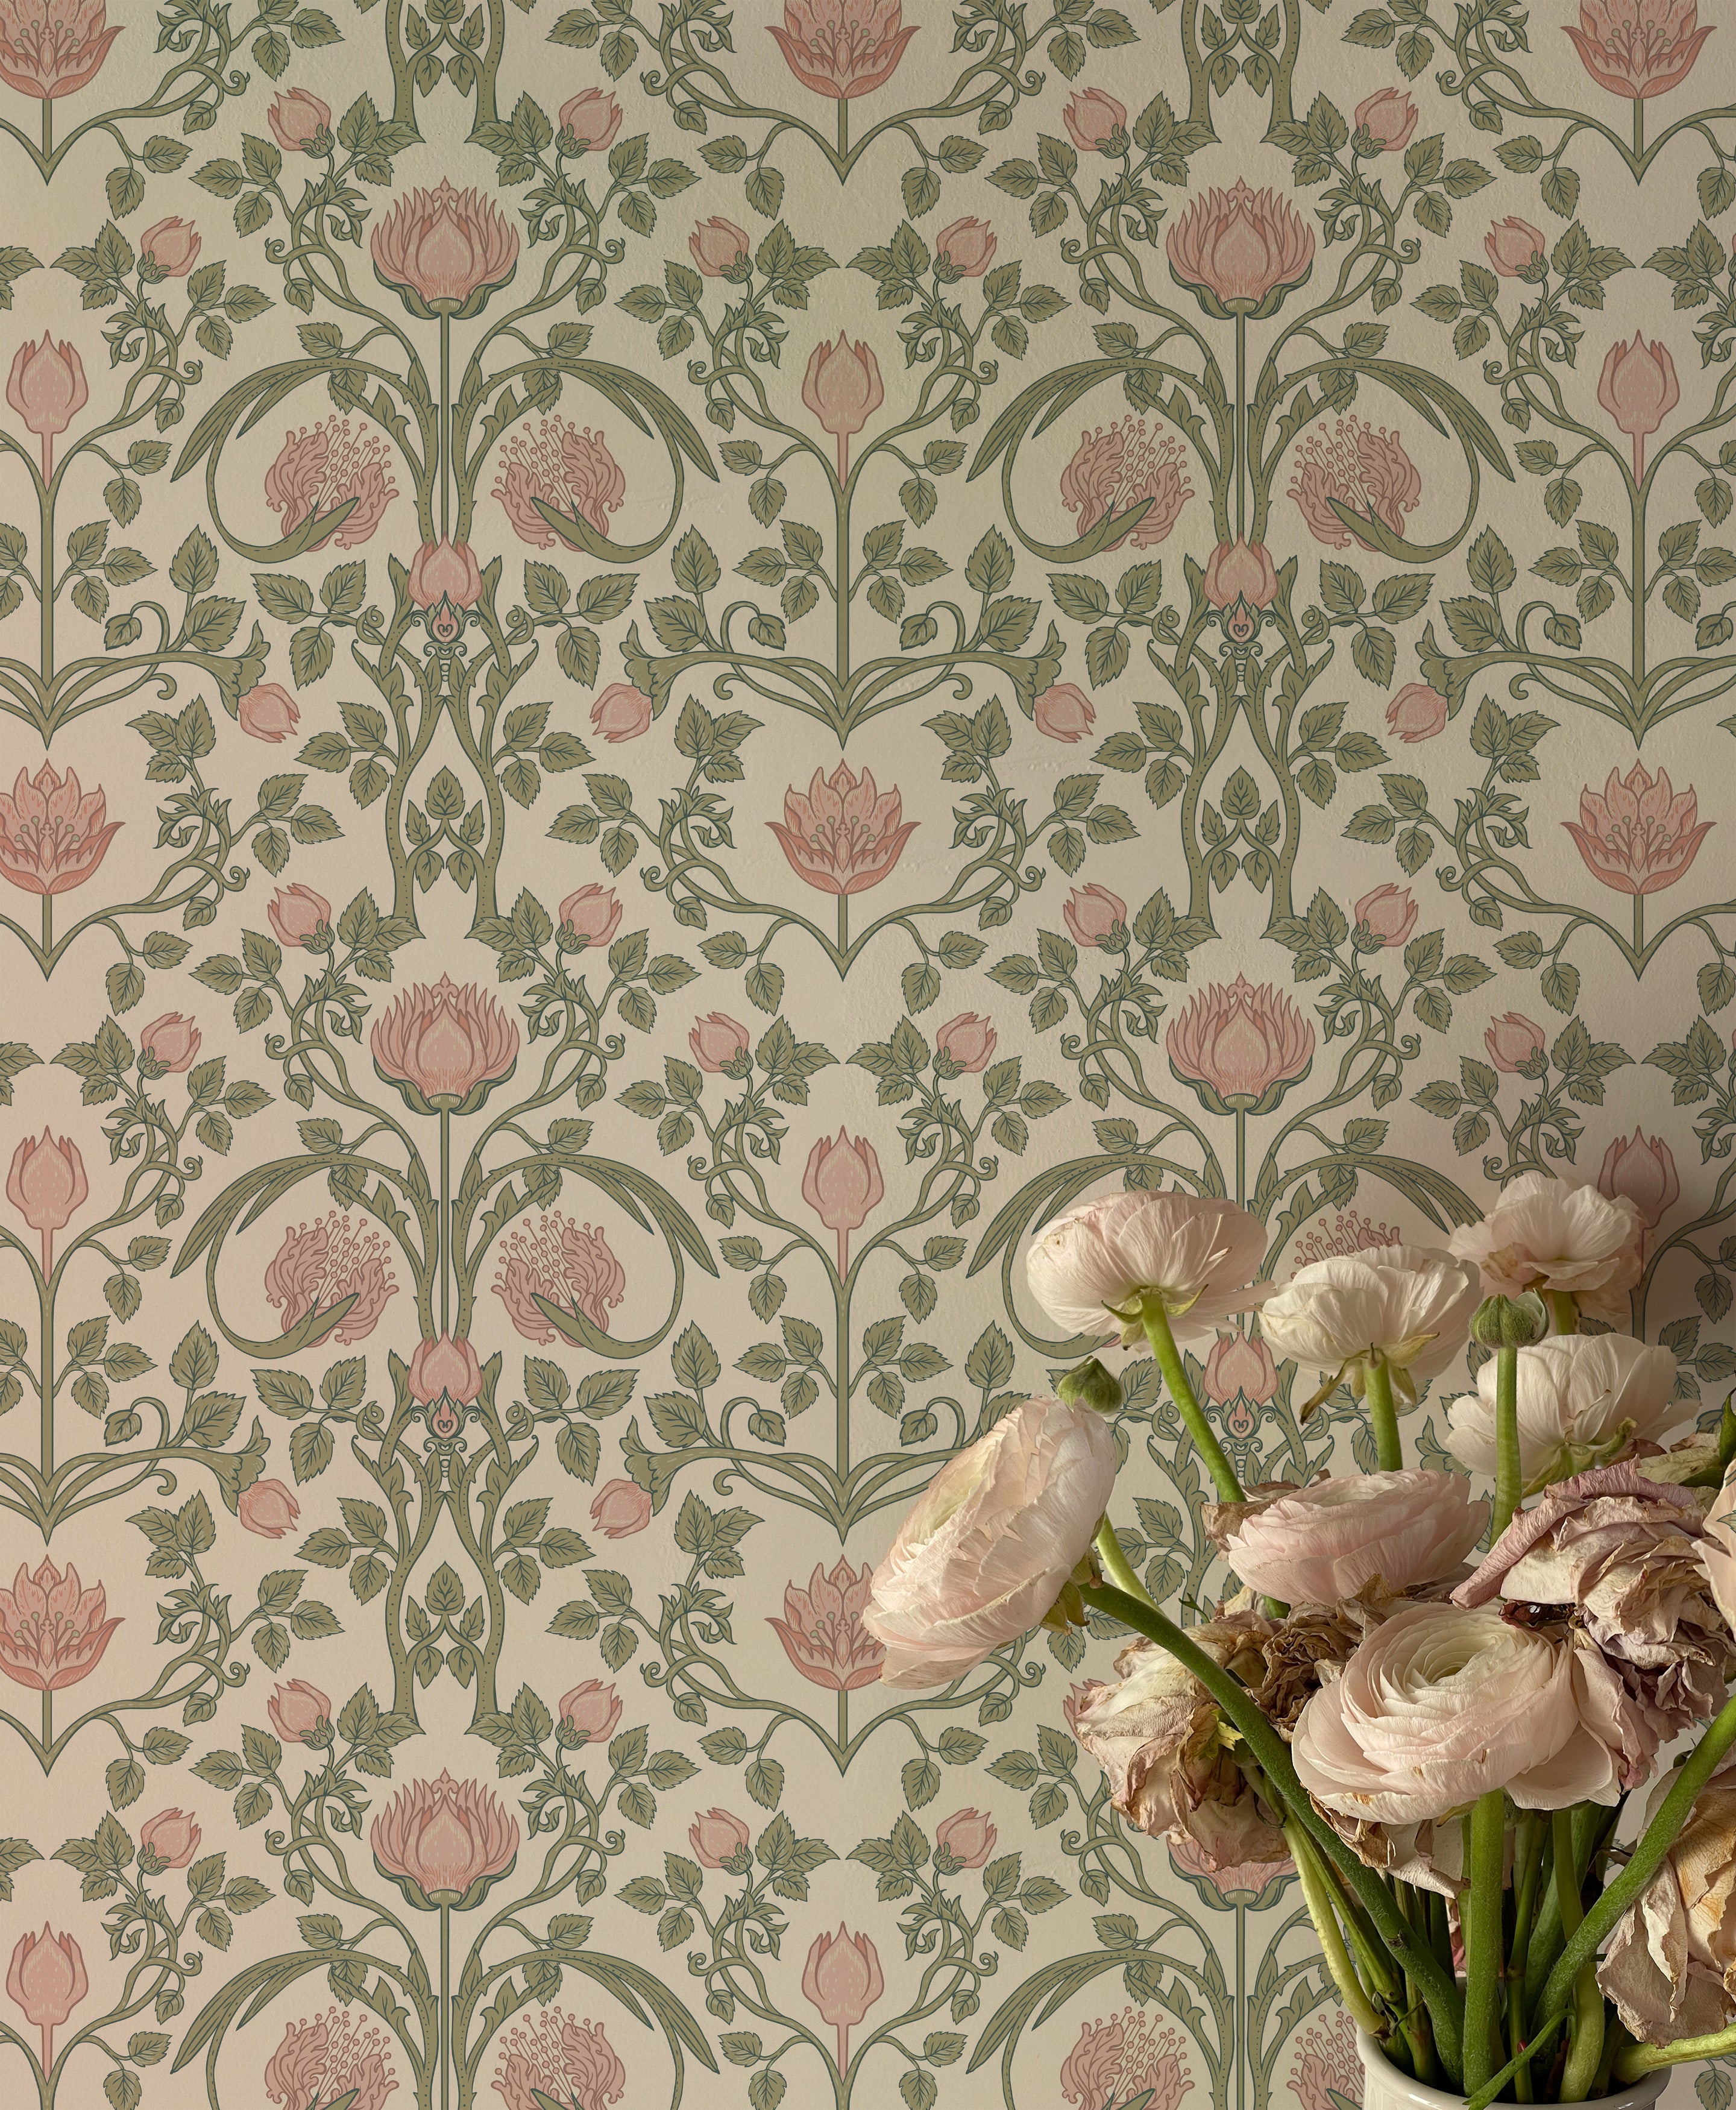 A close-up of a vase holding a variety of pale pink flowers, with the detailed pattern of the pastel floral damask wallpaper filling the frame